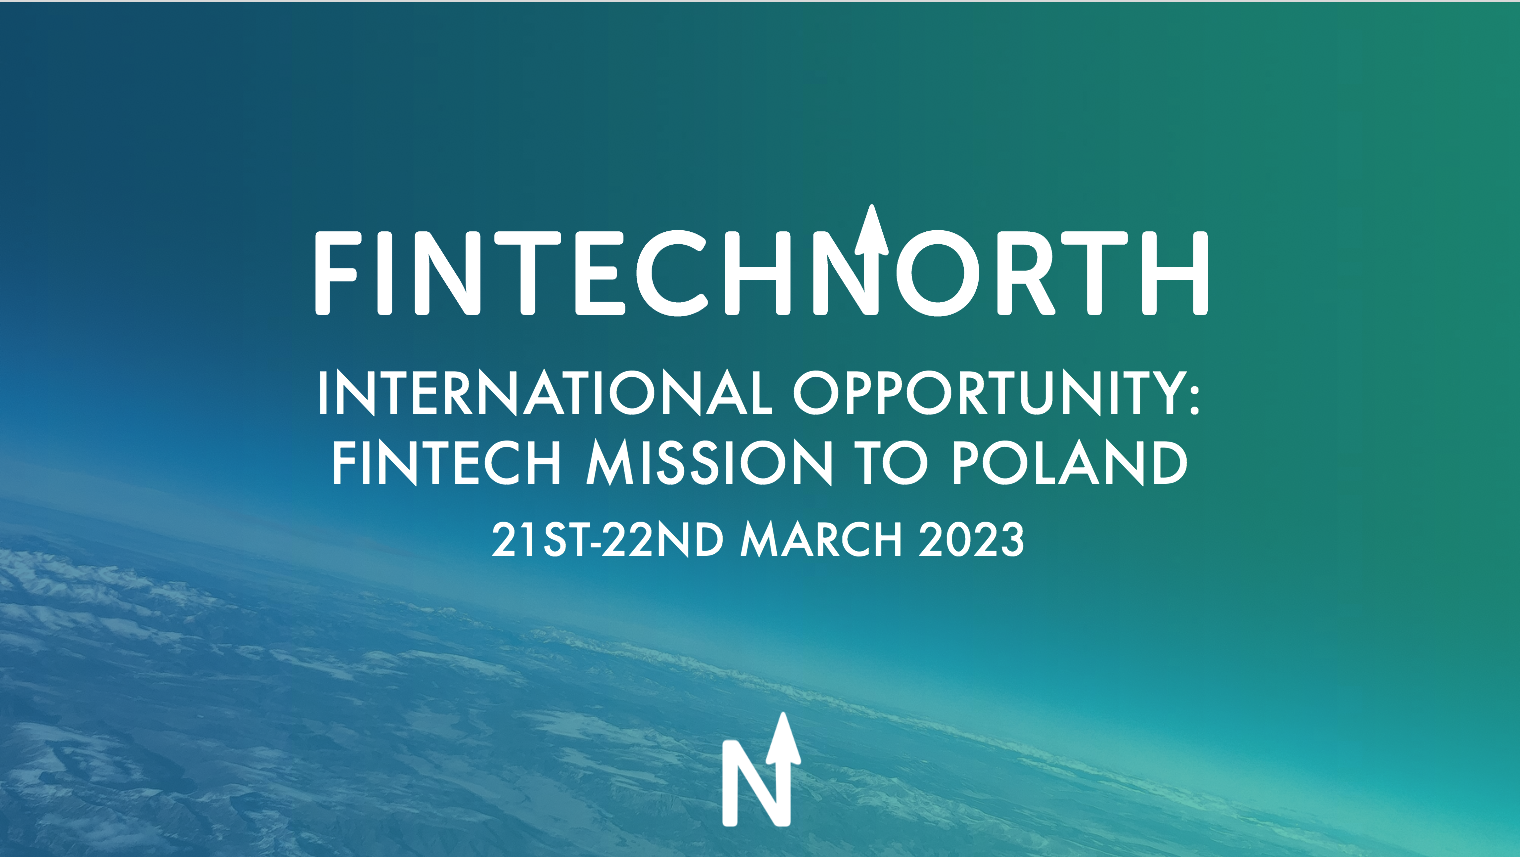 Opportunity for Northern FinTechs to pitch at FinTech conference in Poland, as part of international FinTech mission